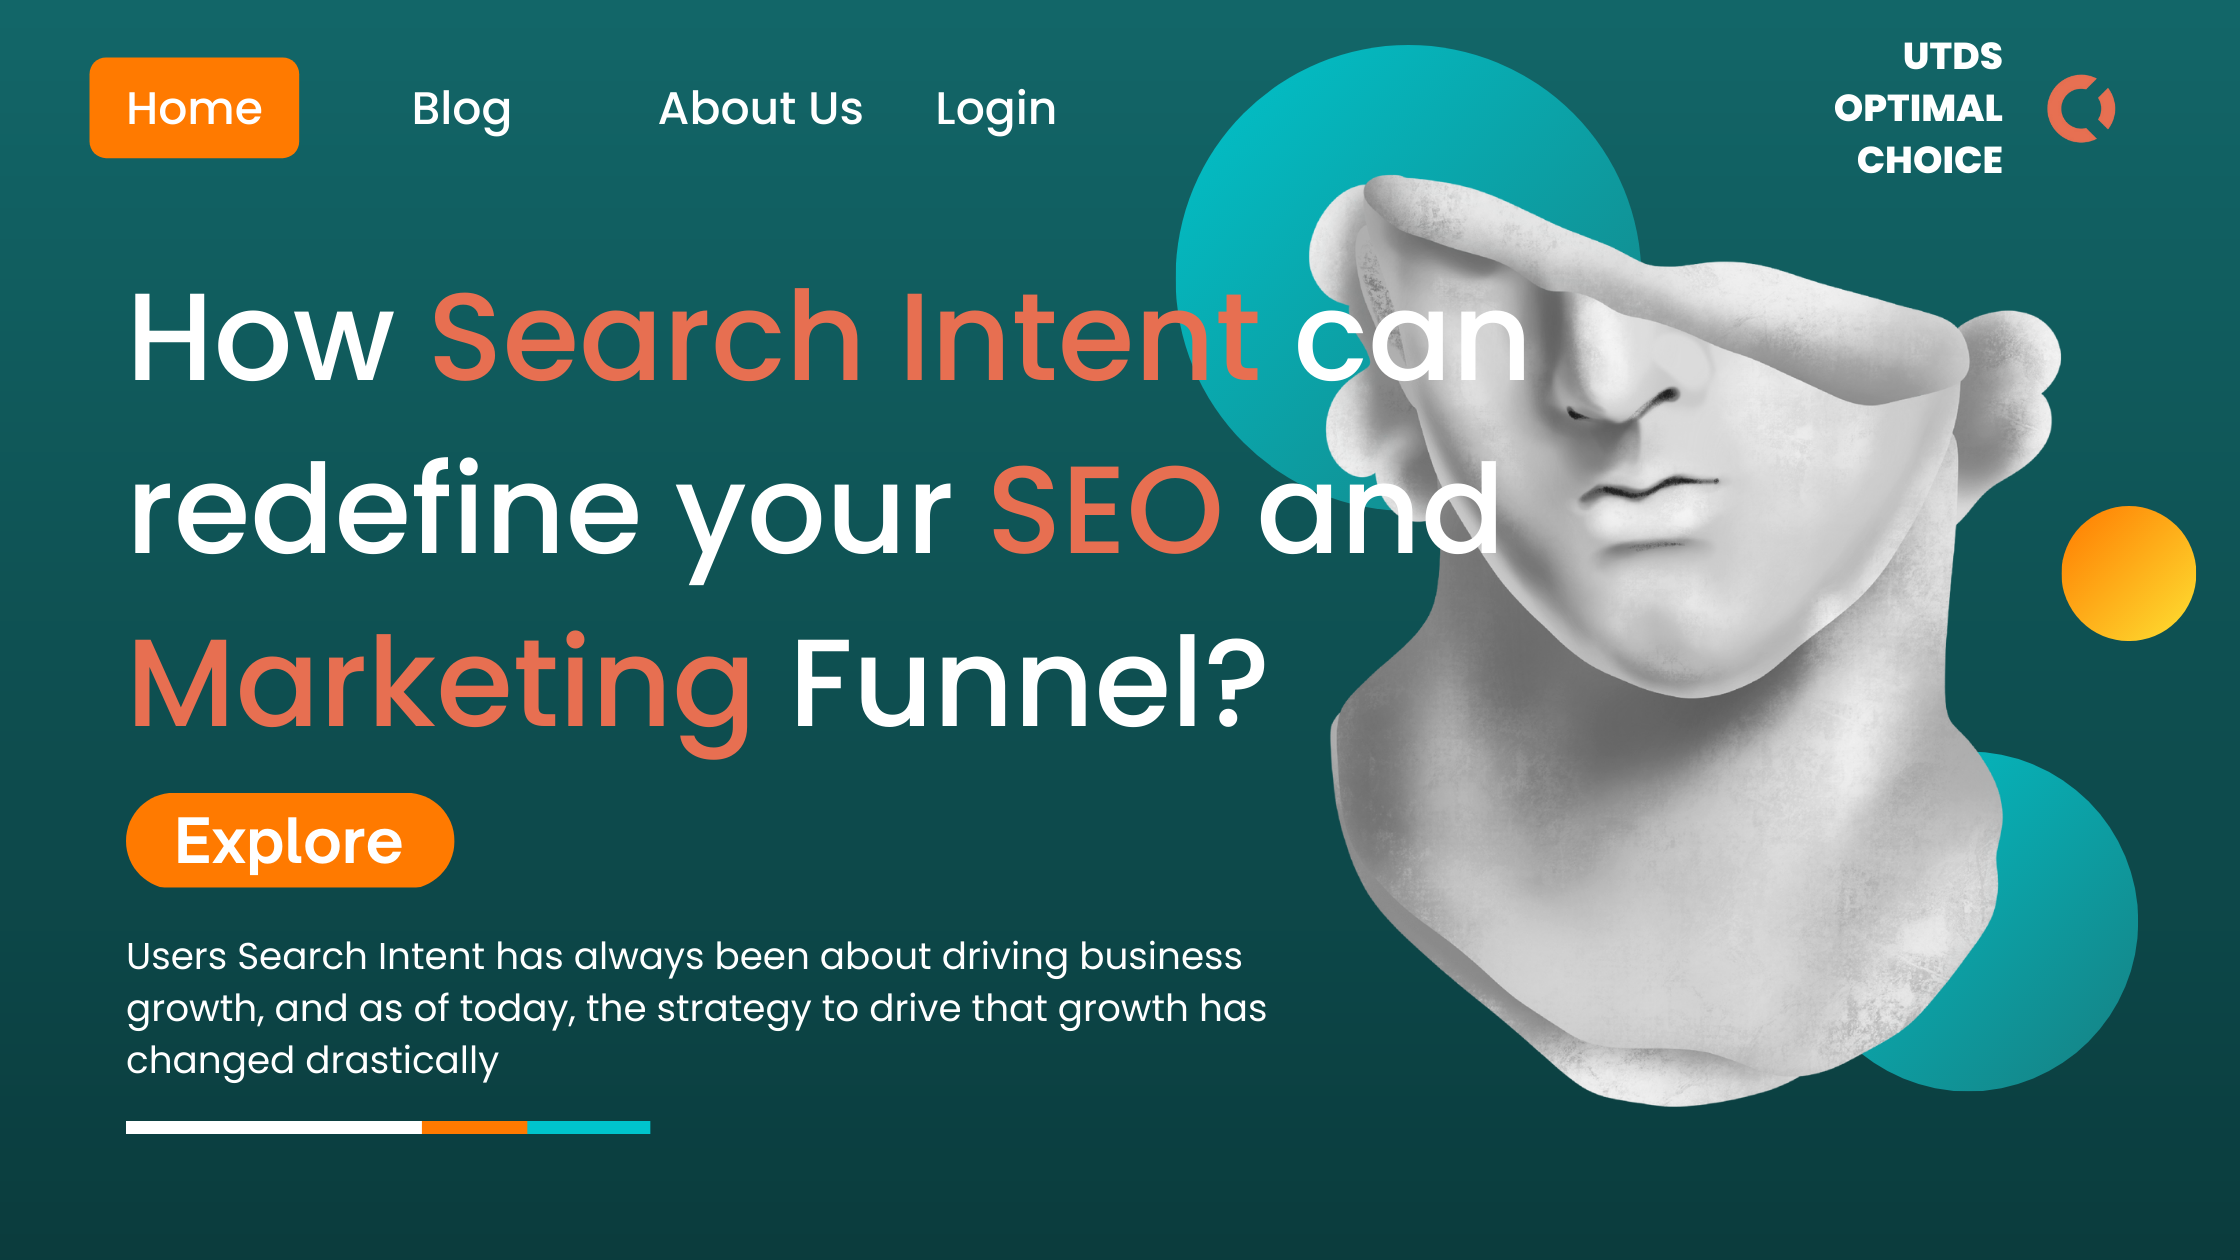 How Search Intent can redefine your SEO and Marketing Funnel?